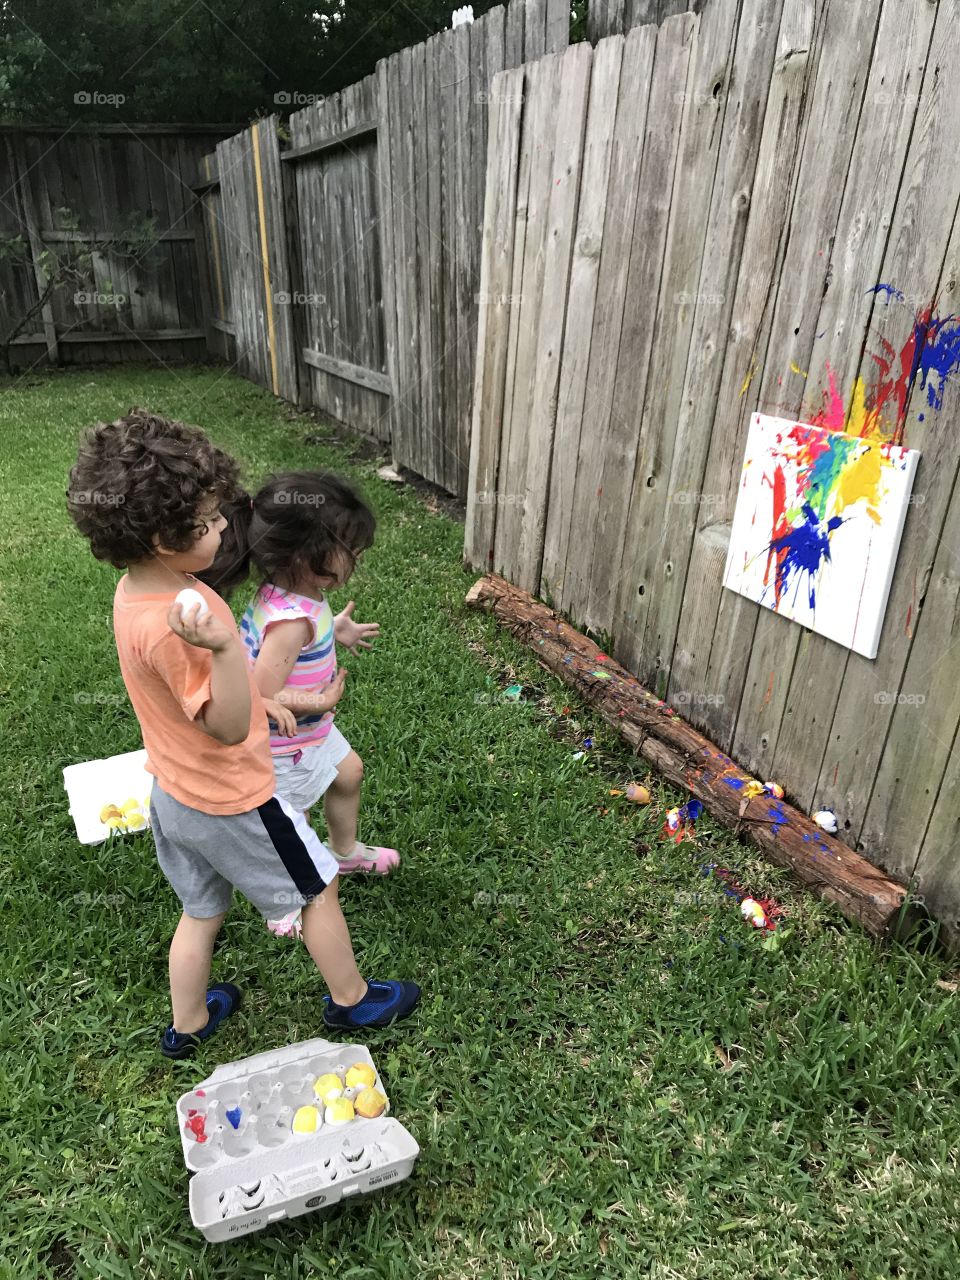 My kids enjoying a fun filled activity that included throwing eggs filled with different paint colors at a canvas. Creating a unique kind of art. 